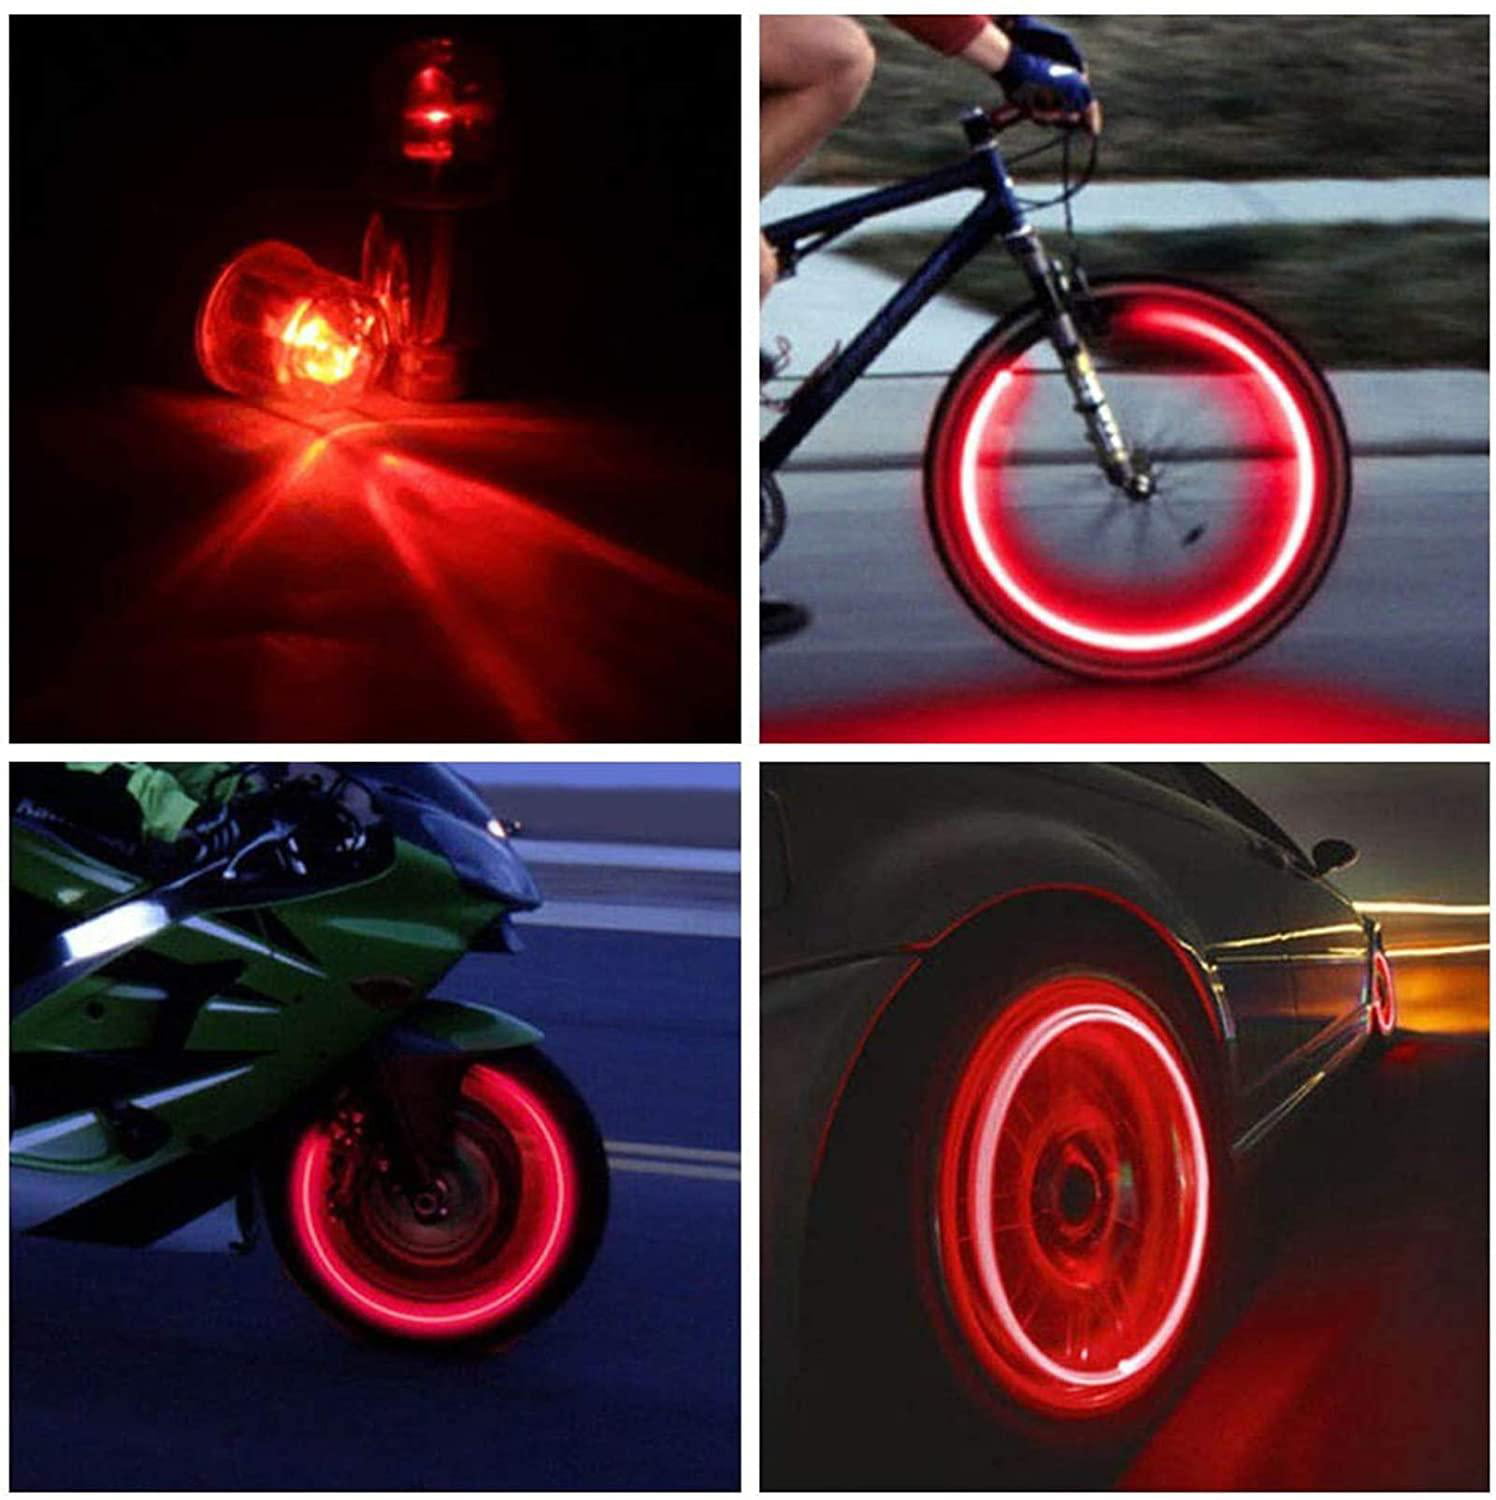 Blue, 12PCS HSIQIAN LED Bike Wheel Light Tyre Tire Valve Caps Neon Light for Car Motorcycle Bicycle 